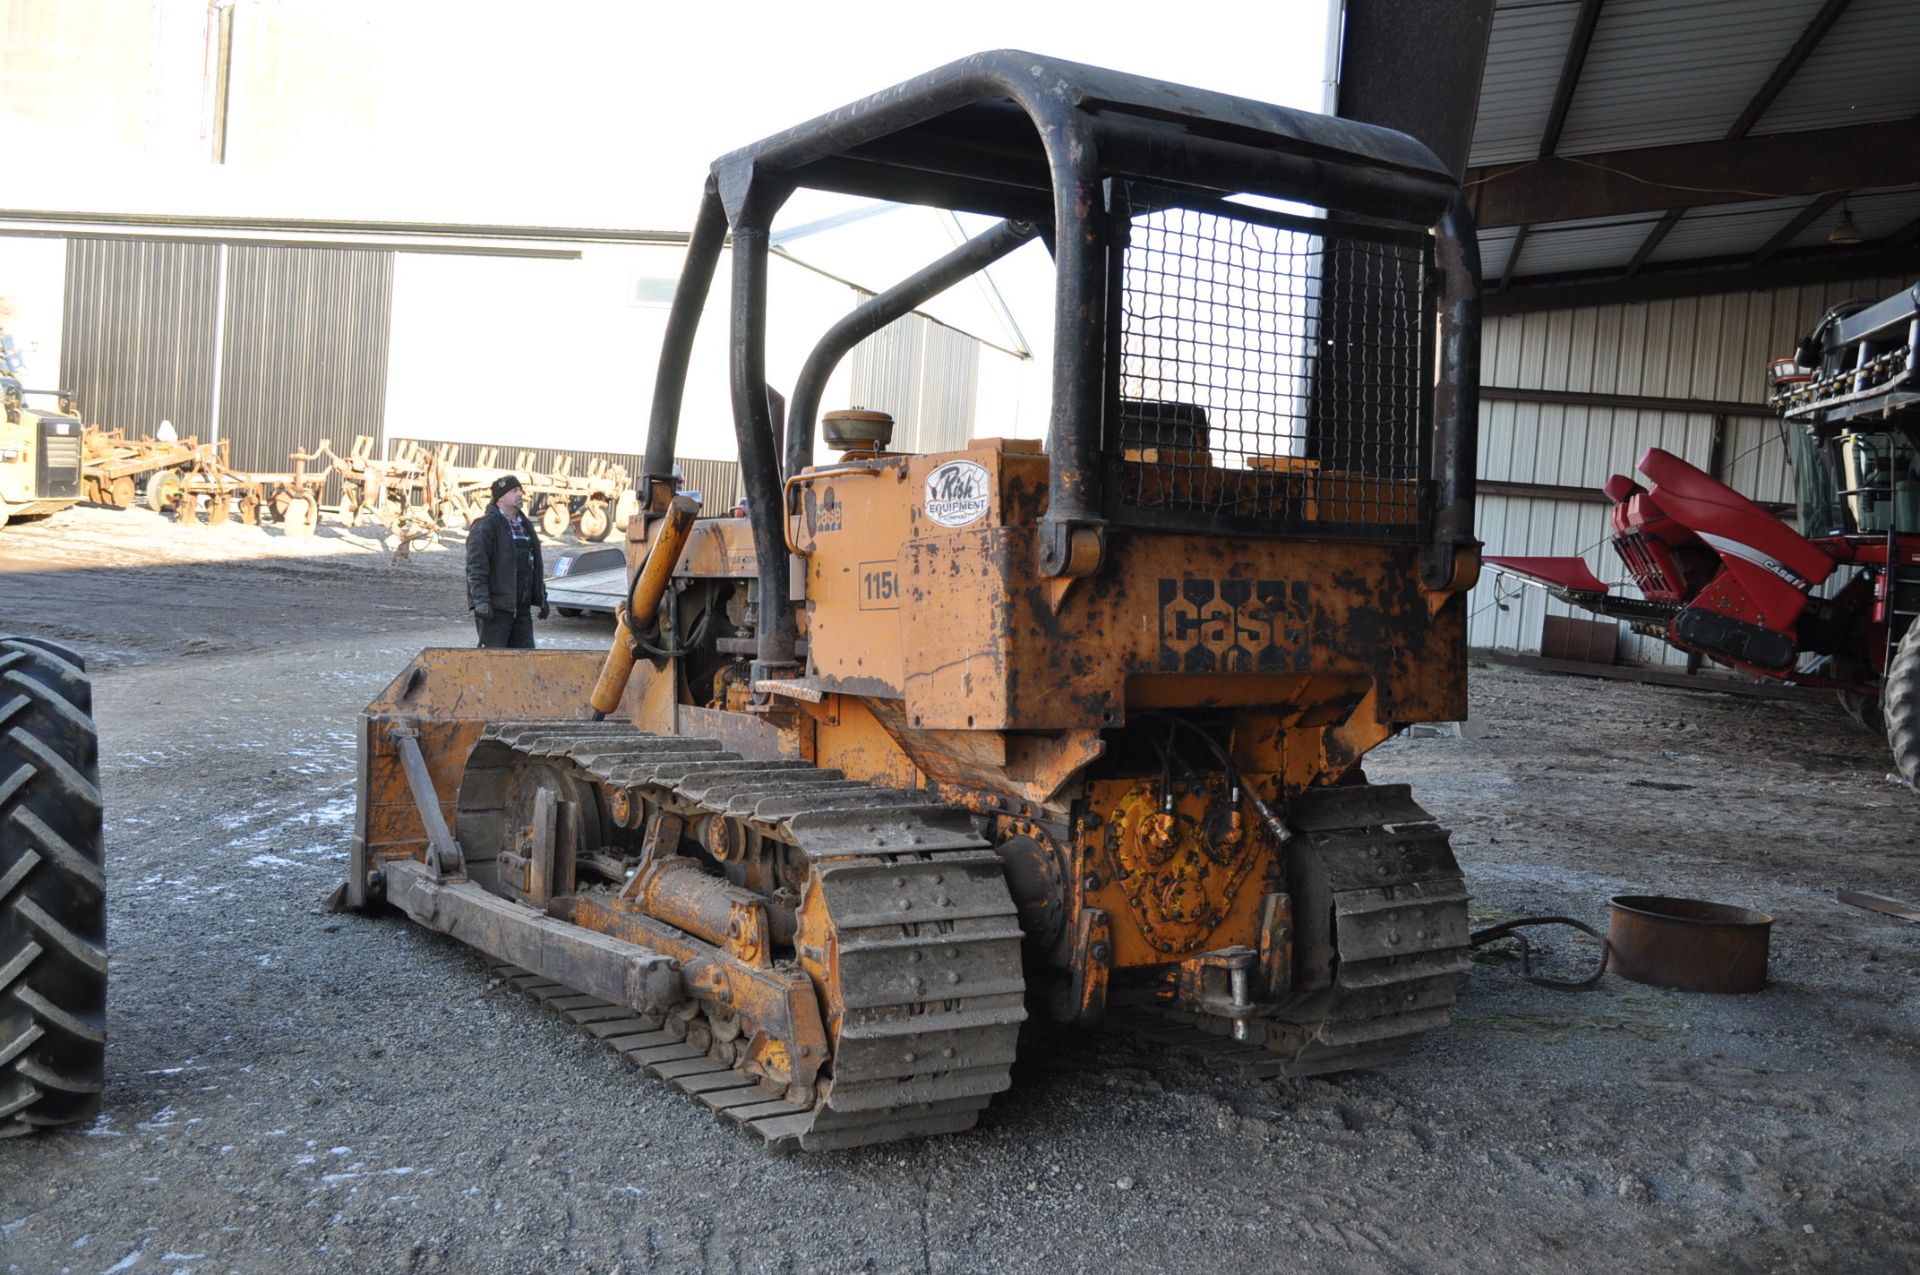 Case 1150 dozer, 8’ 4 way blade, rear hitch, diesel, shows 1250 hrs, hrs unkown, SN missing - Image 2 of 11